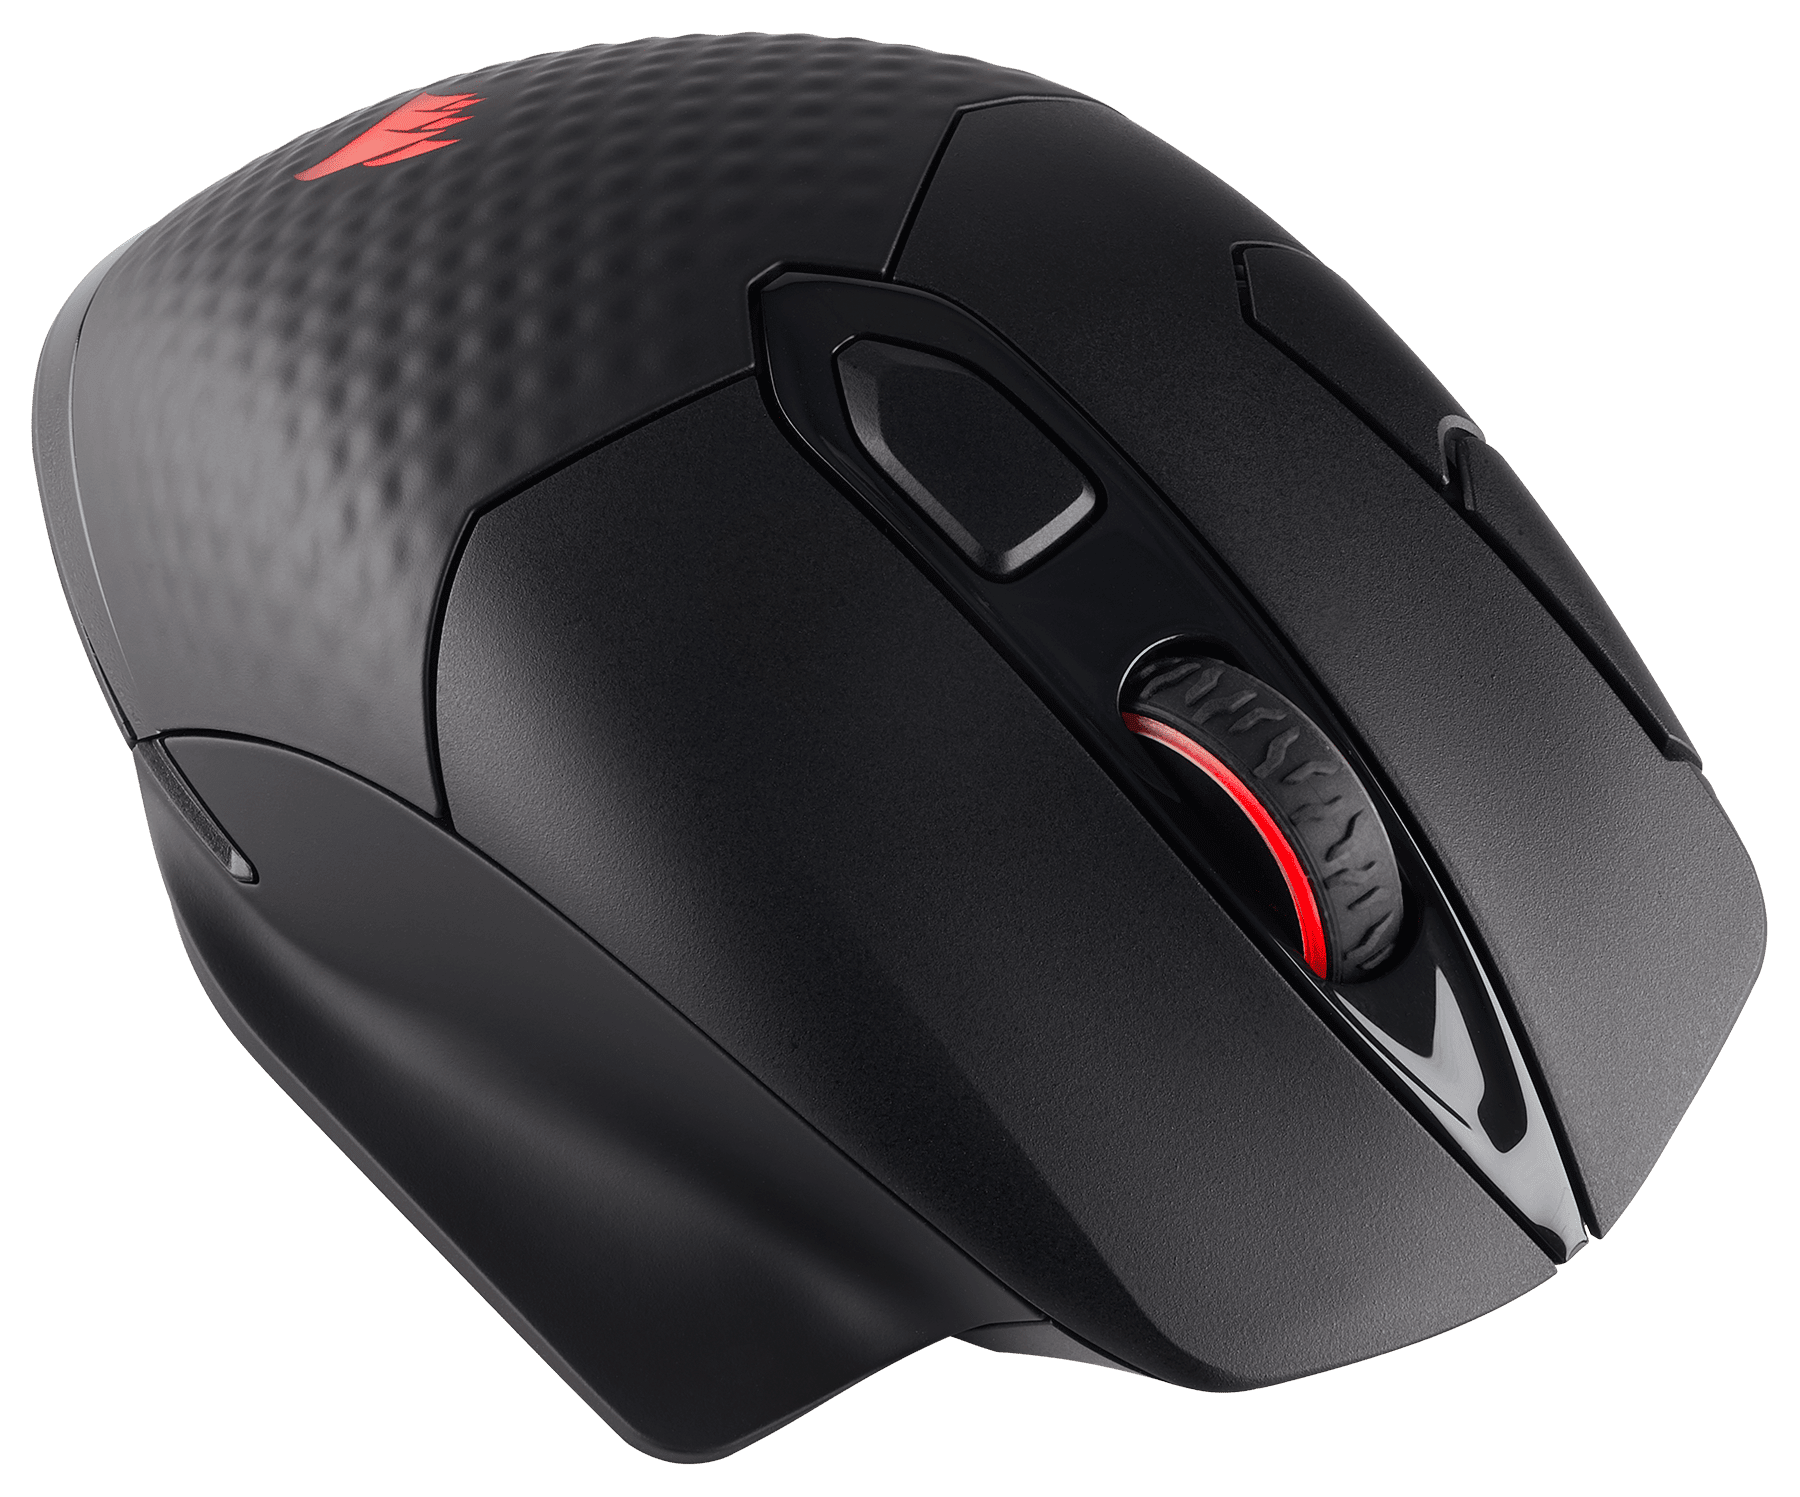 CORE RGB SE Performance Wireless Mouse with Qi® Wireless Charging (Refurbished)